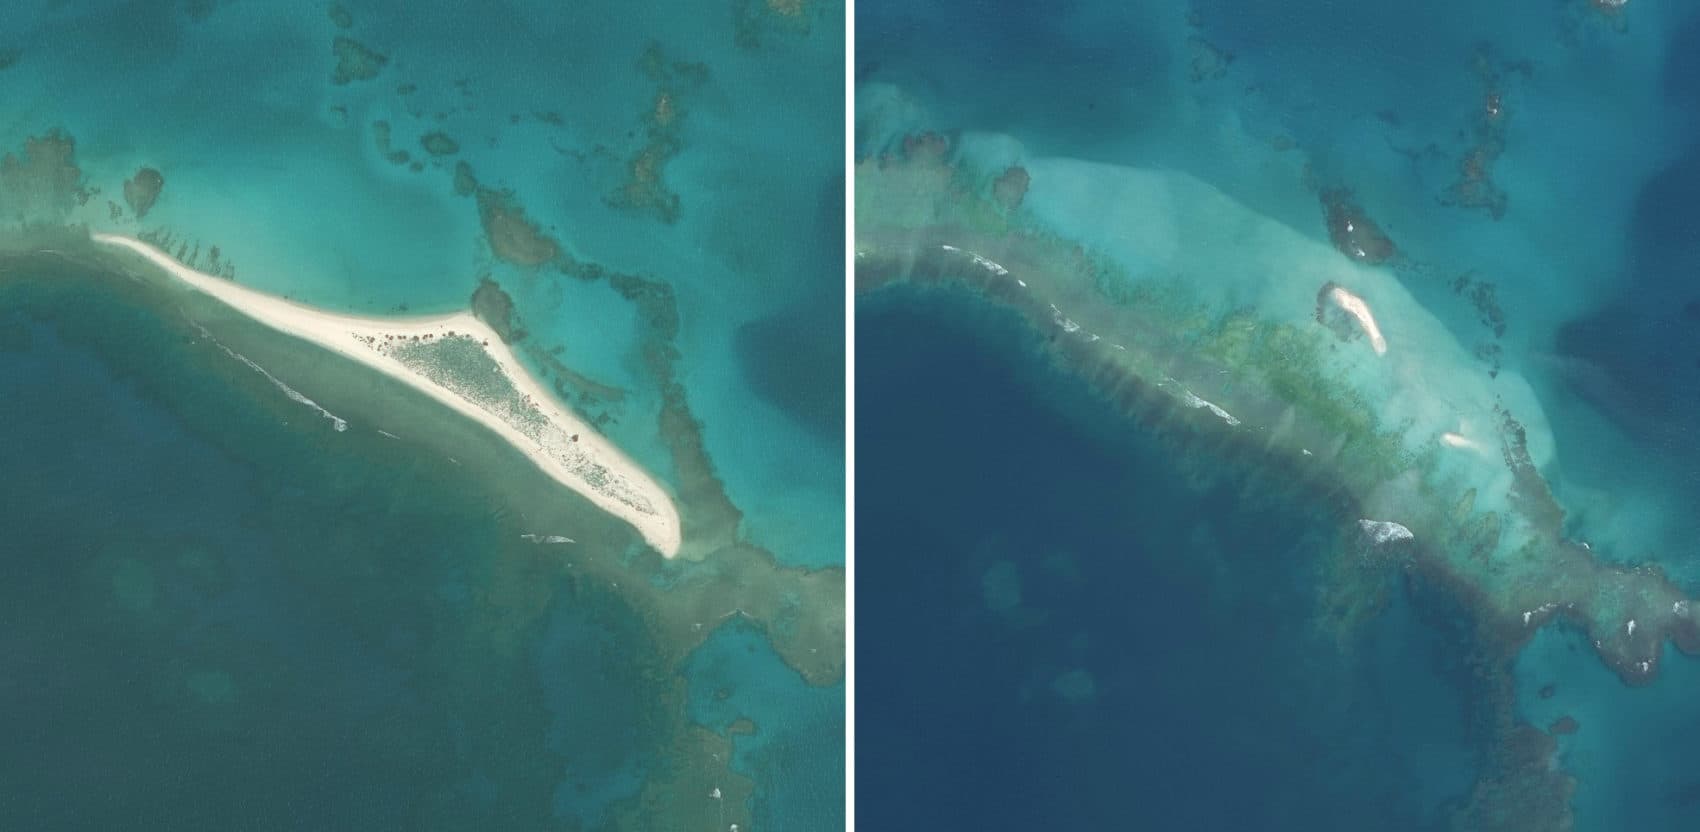 Hawaii's East island before Hurricane Walaka (left) and after (right). (Courtesy of Chip Fletcher)